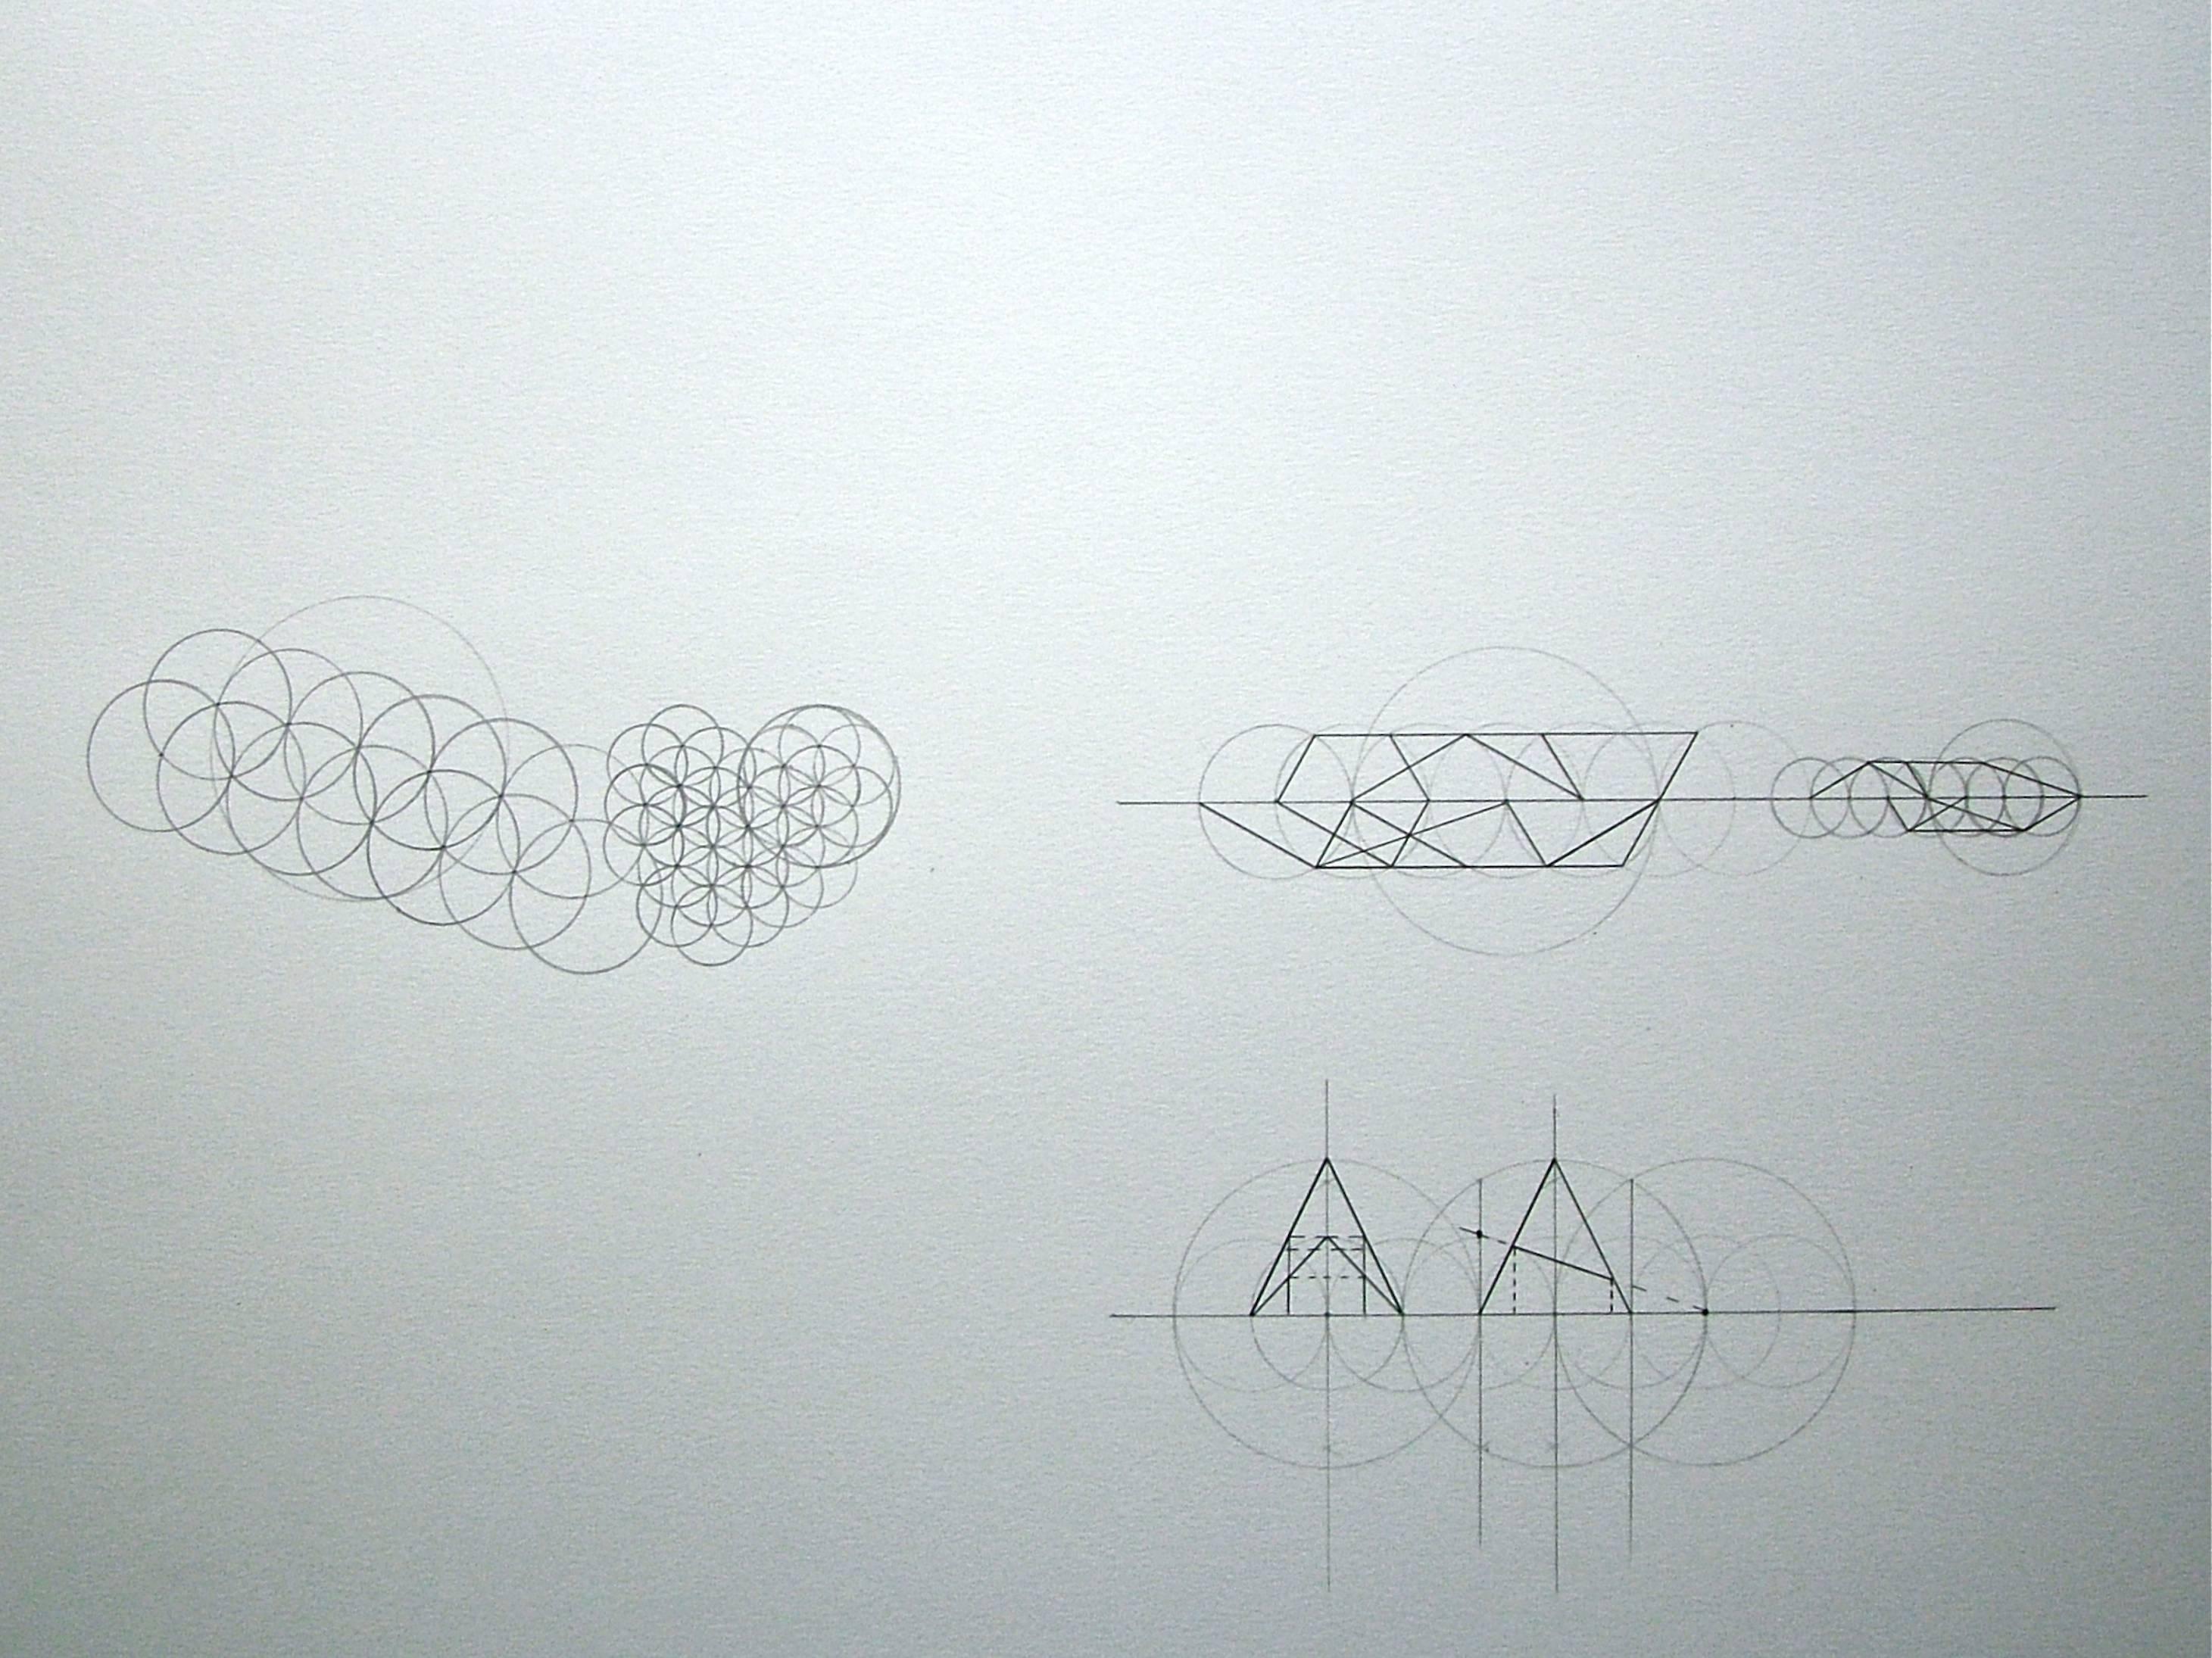 Brigitte Parusel's works are underlined by an emphasis on experimentation and her interest in working within the limitations of a system.

Her drawings are part of an ongoing exploration of a geometric pattern of interconnected circles. The